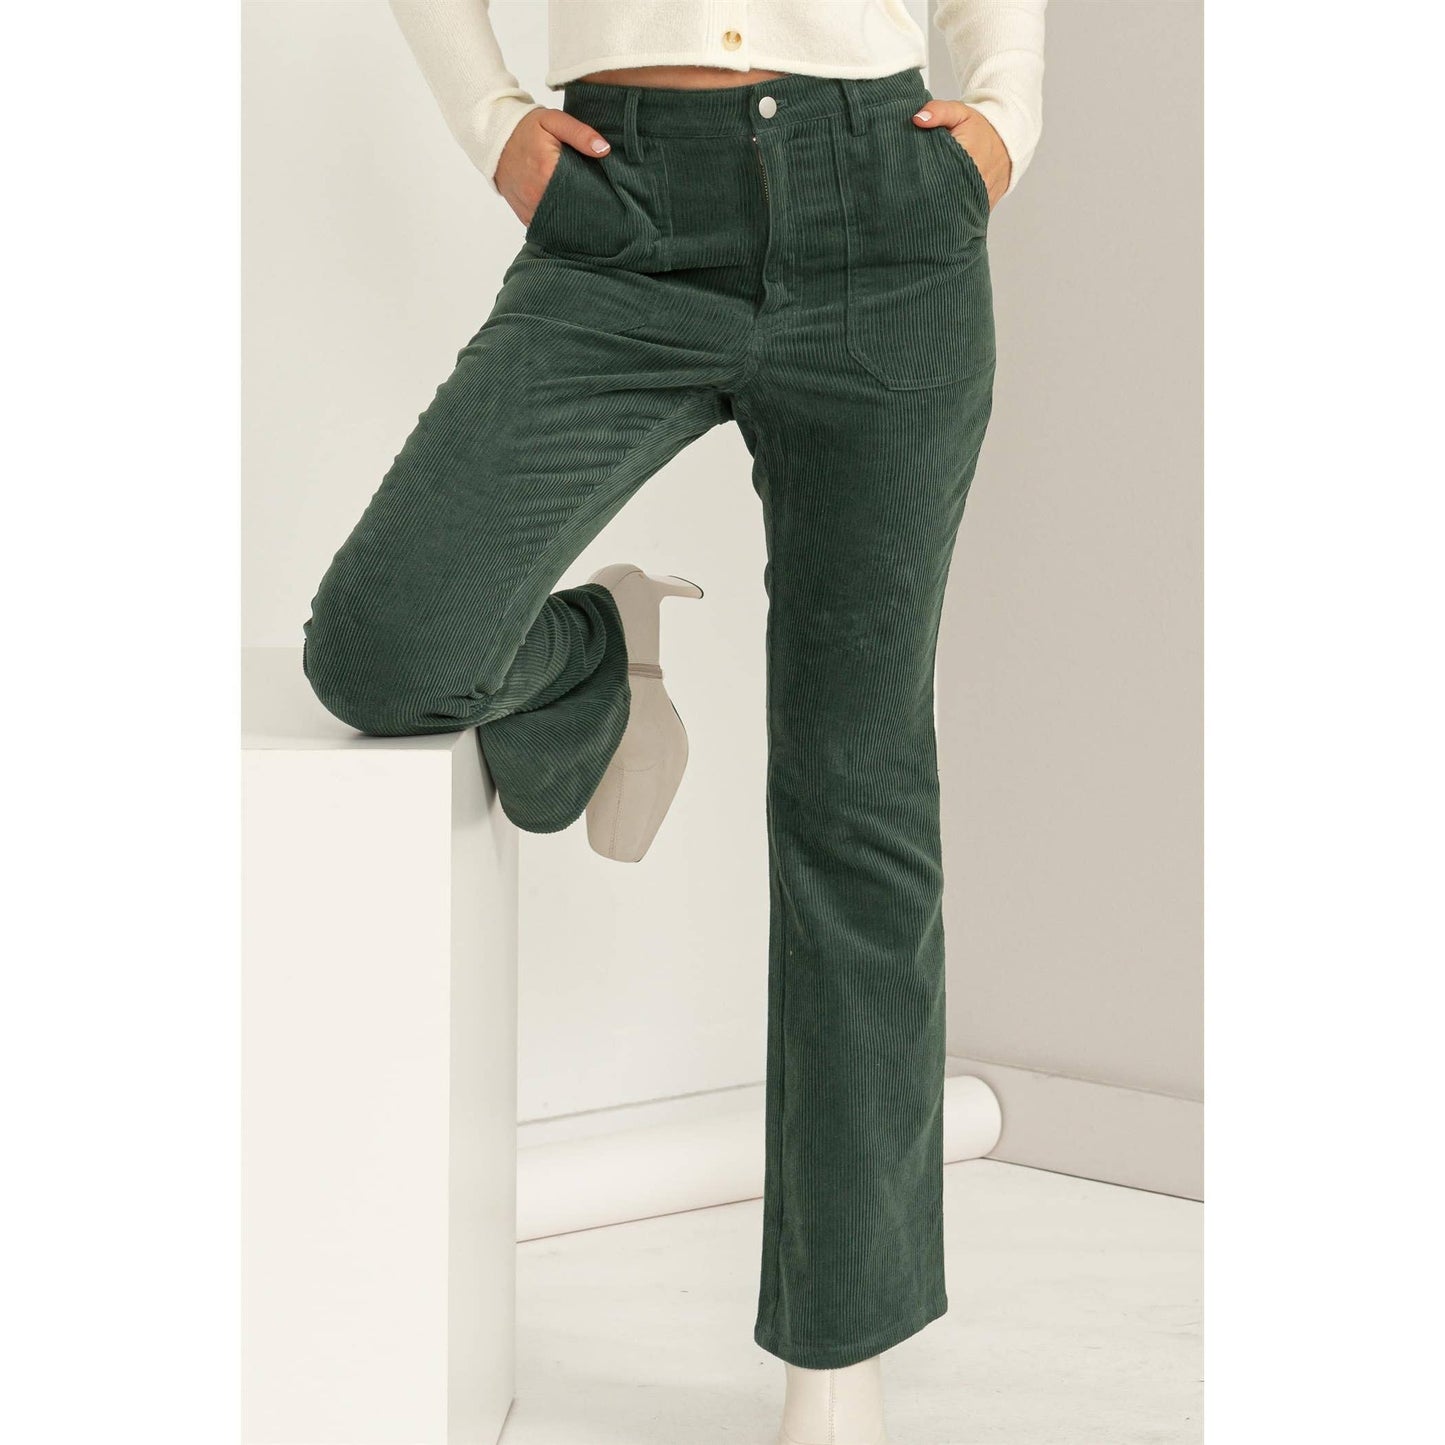 Corduroy Flare Pants in Gray/Green